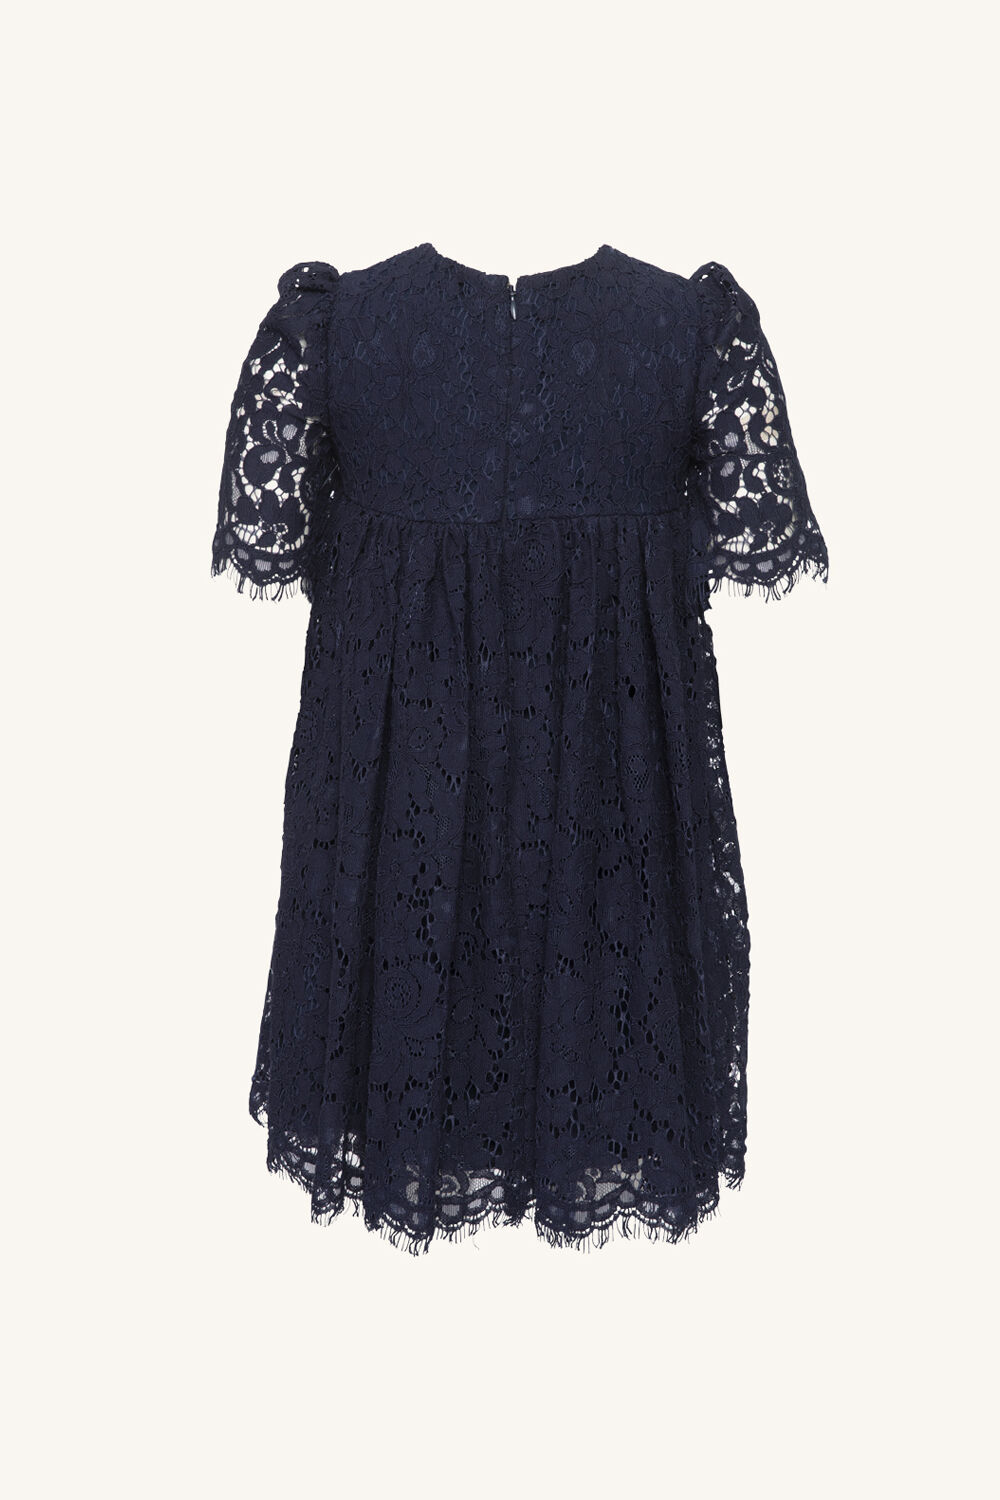 Girls ALICE LACE DRESS in colour MARITIME BLUE